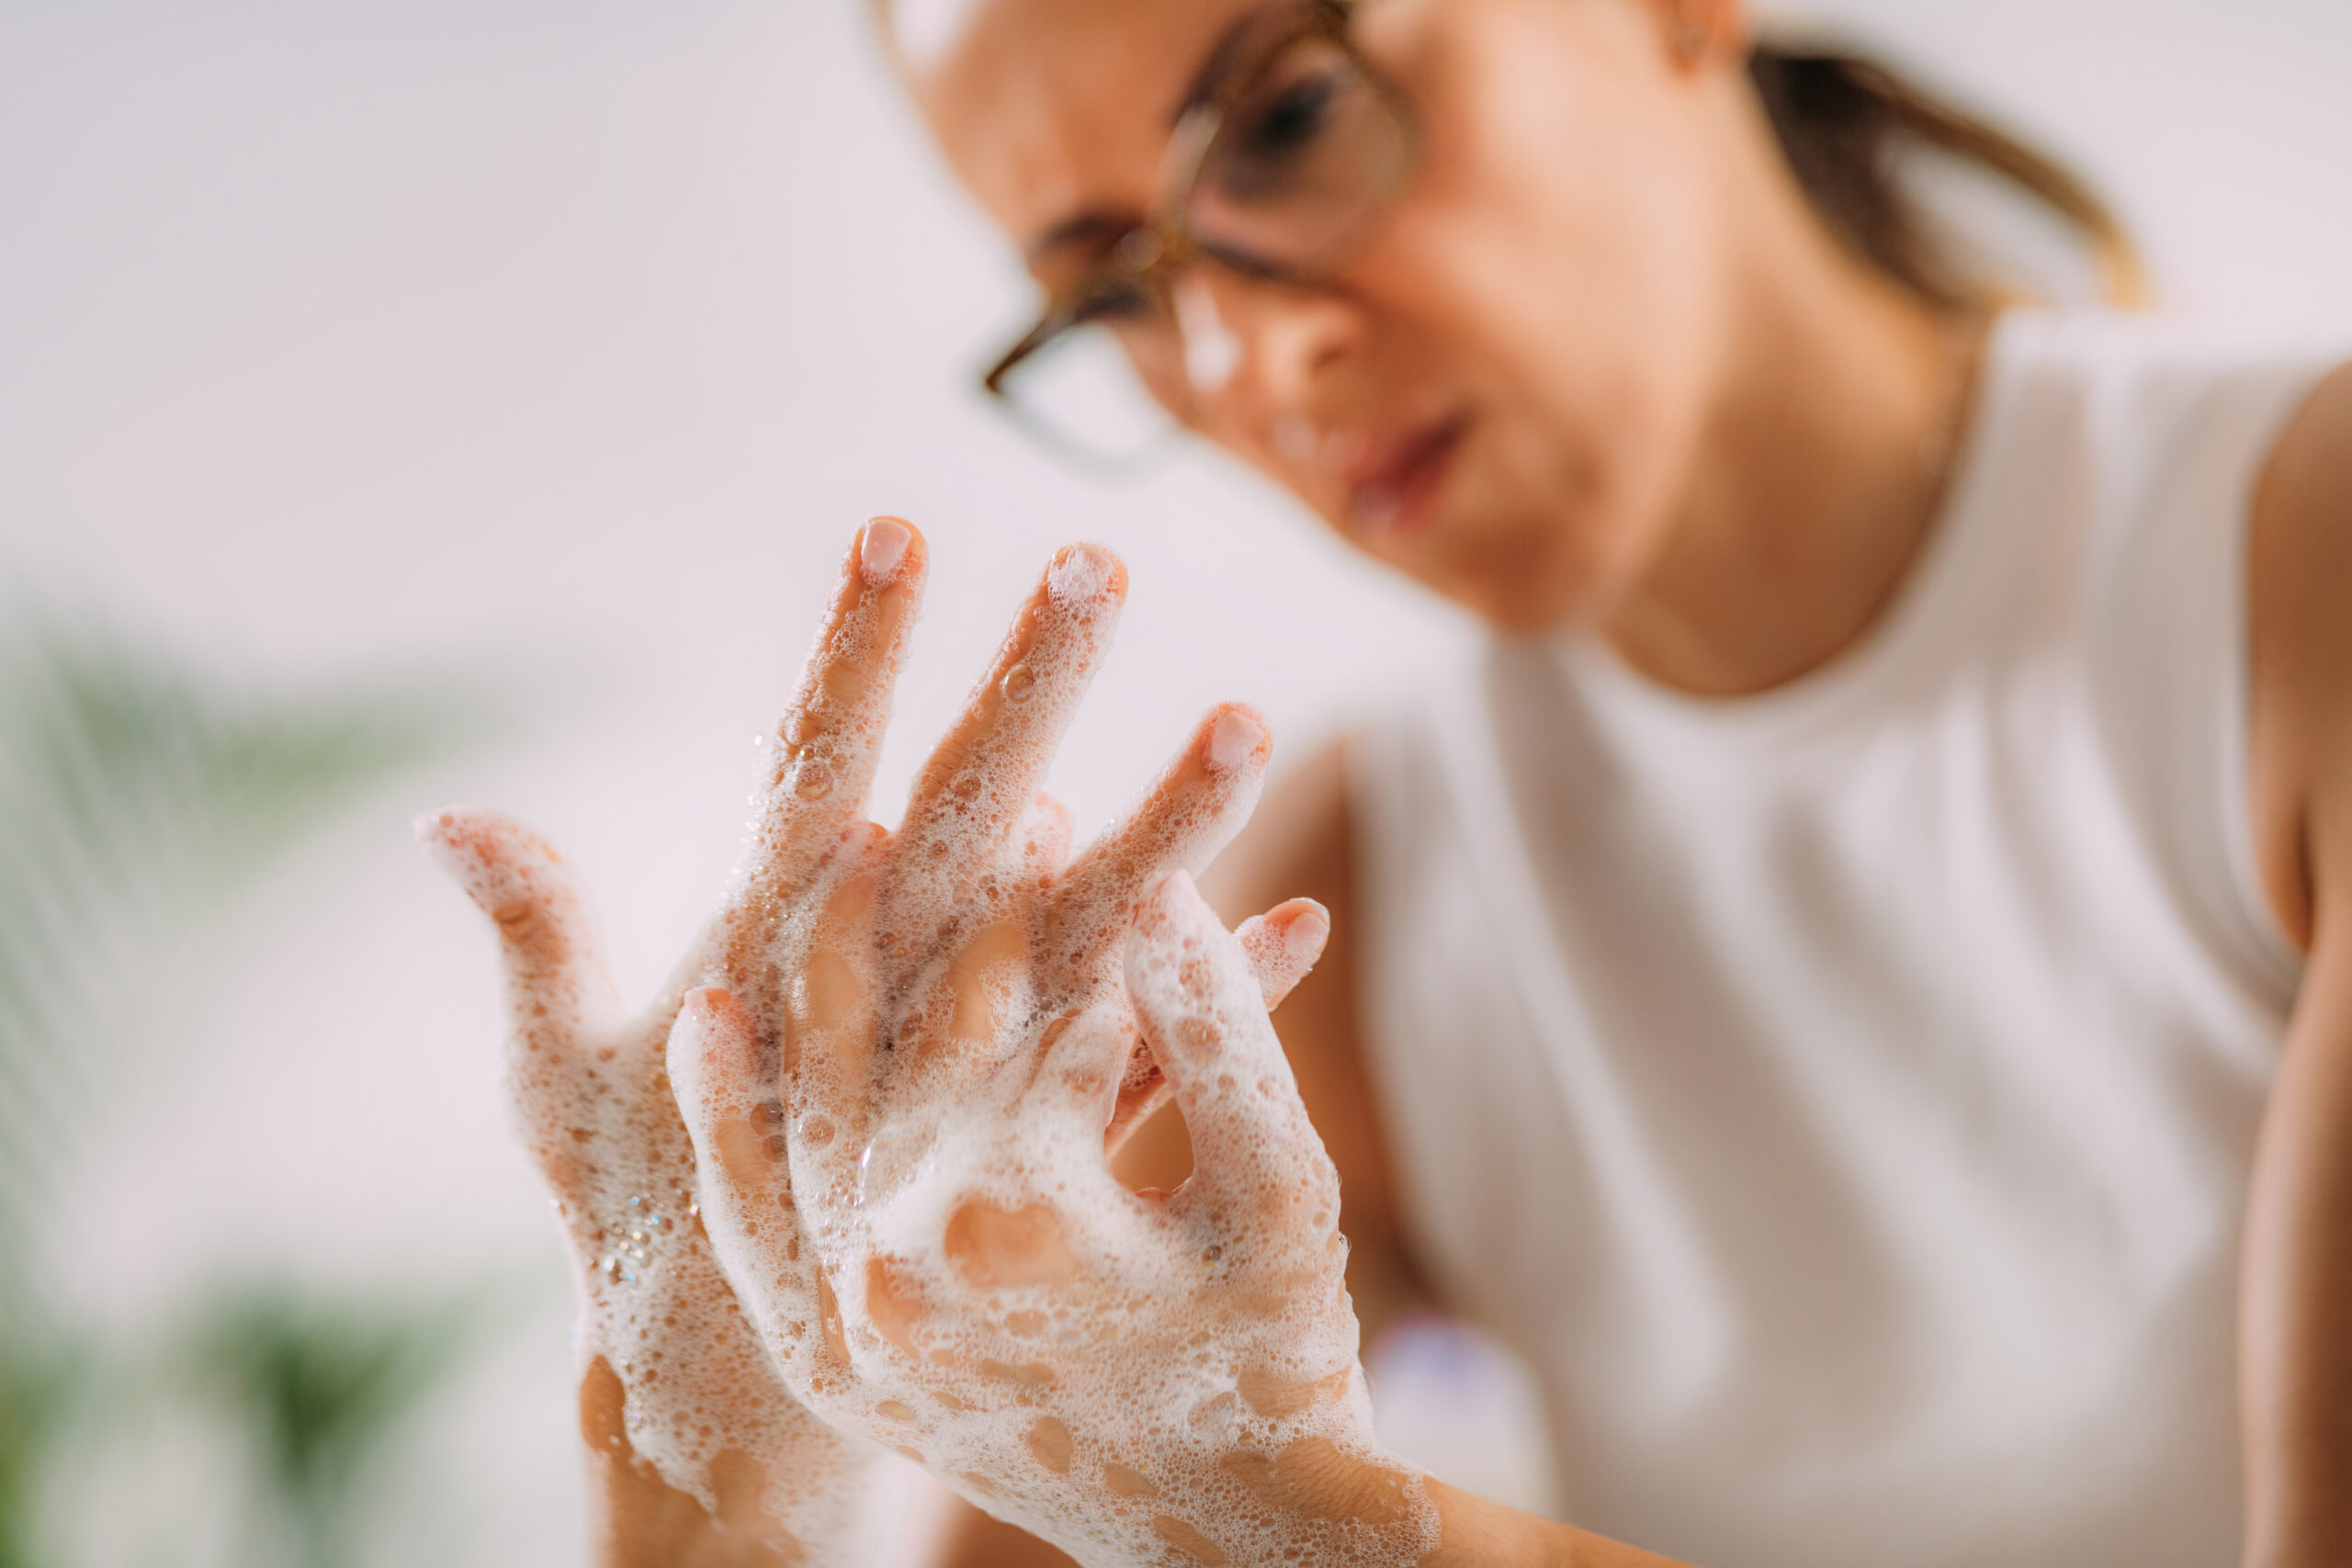 Woman struggling with OCD washing her hands